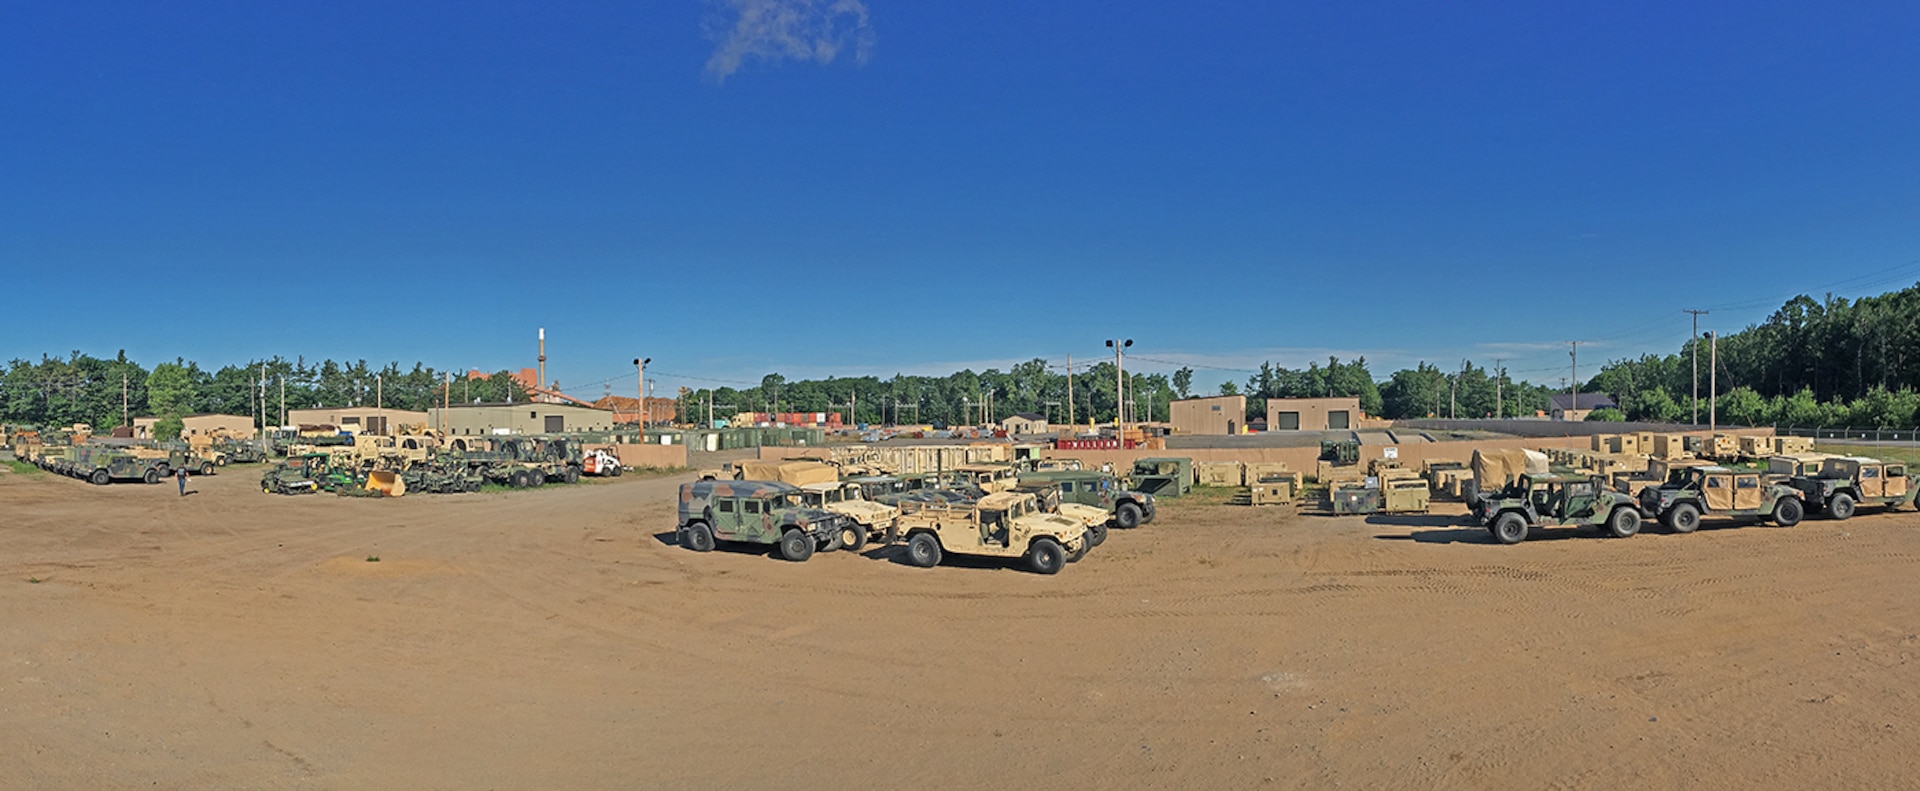 Vehicles lined up awaiting disposition.